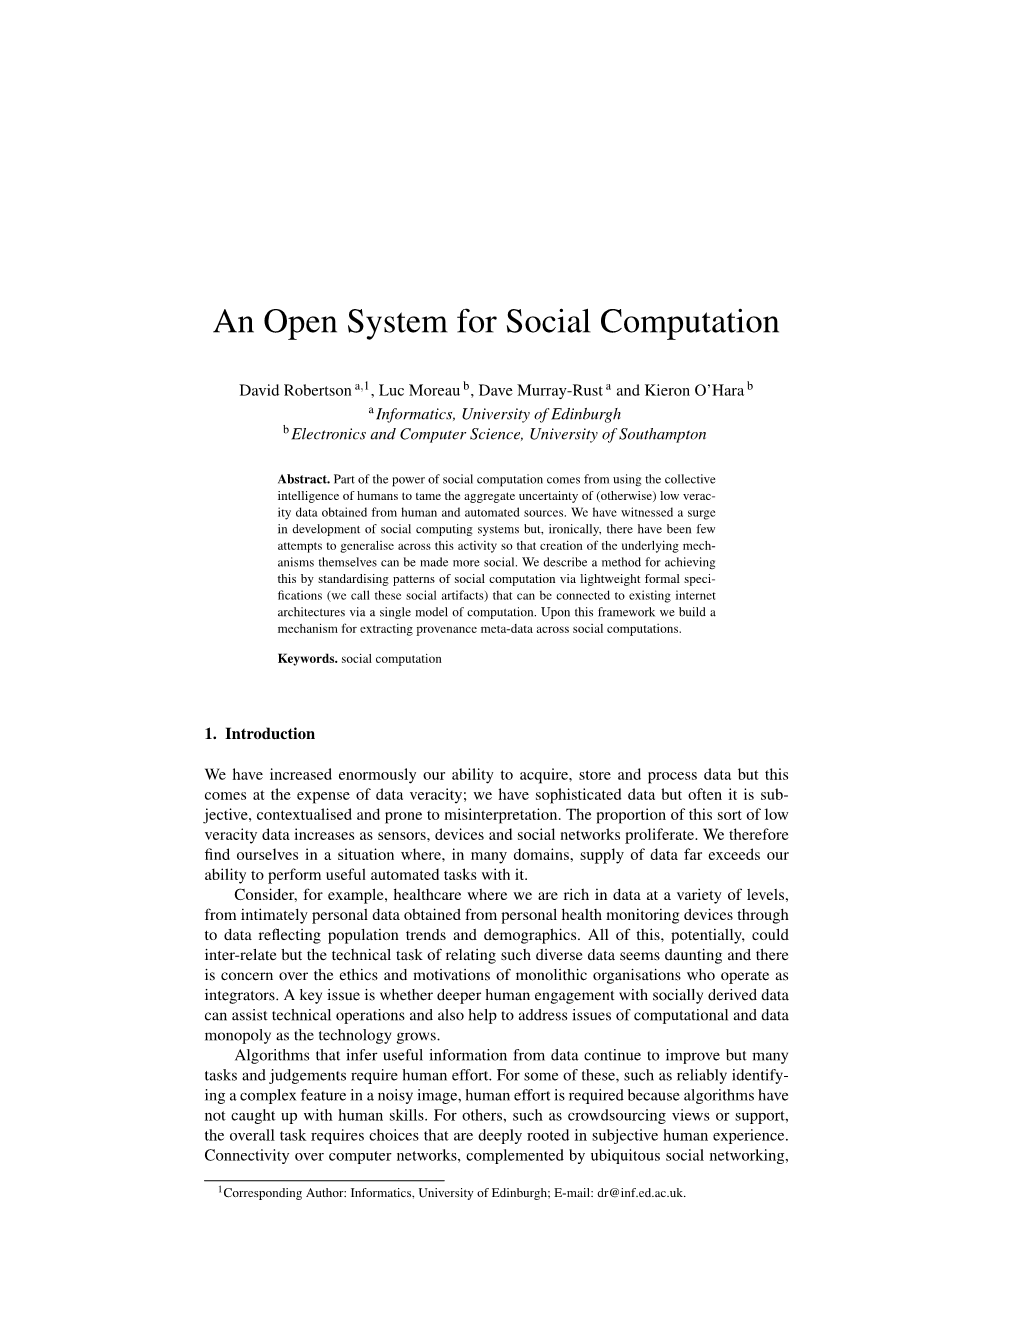 An Open System for Social Computation